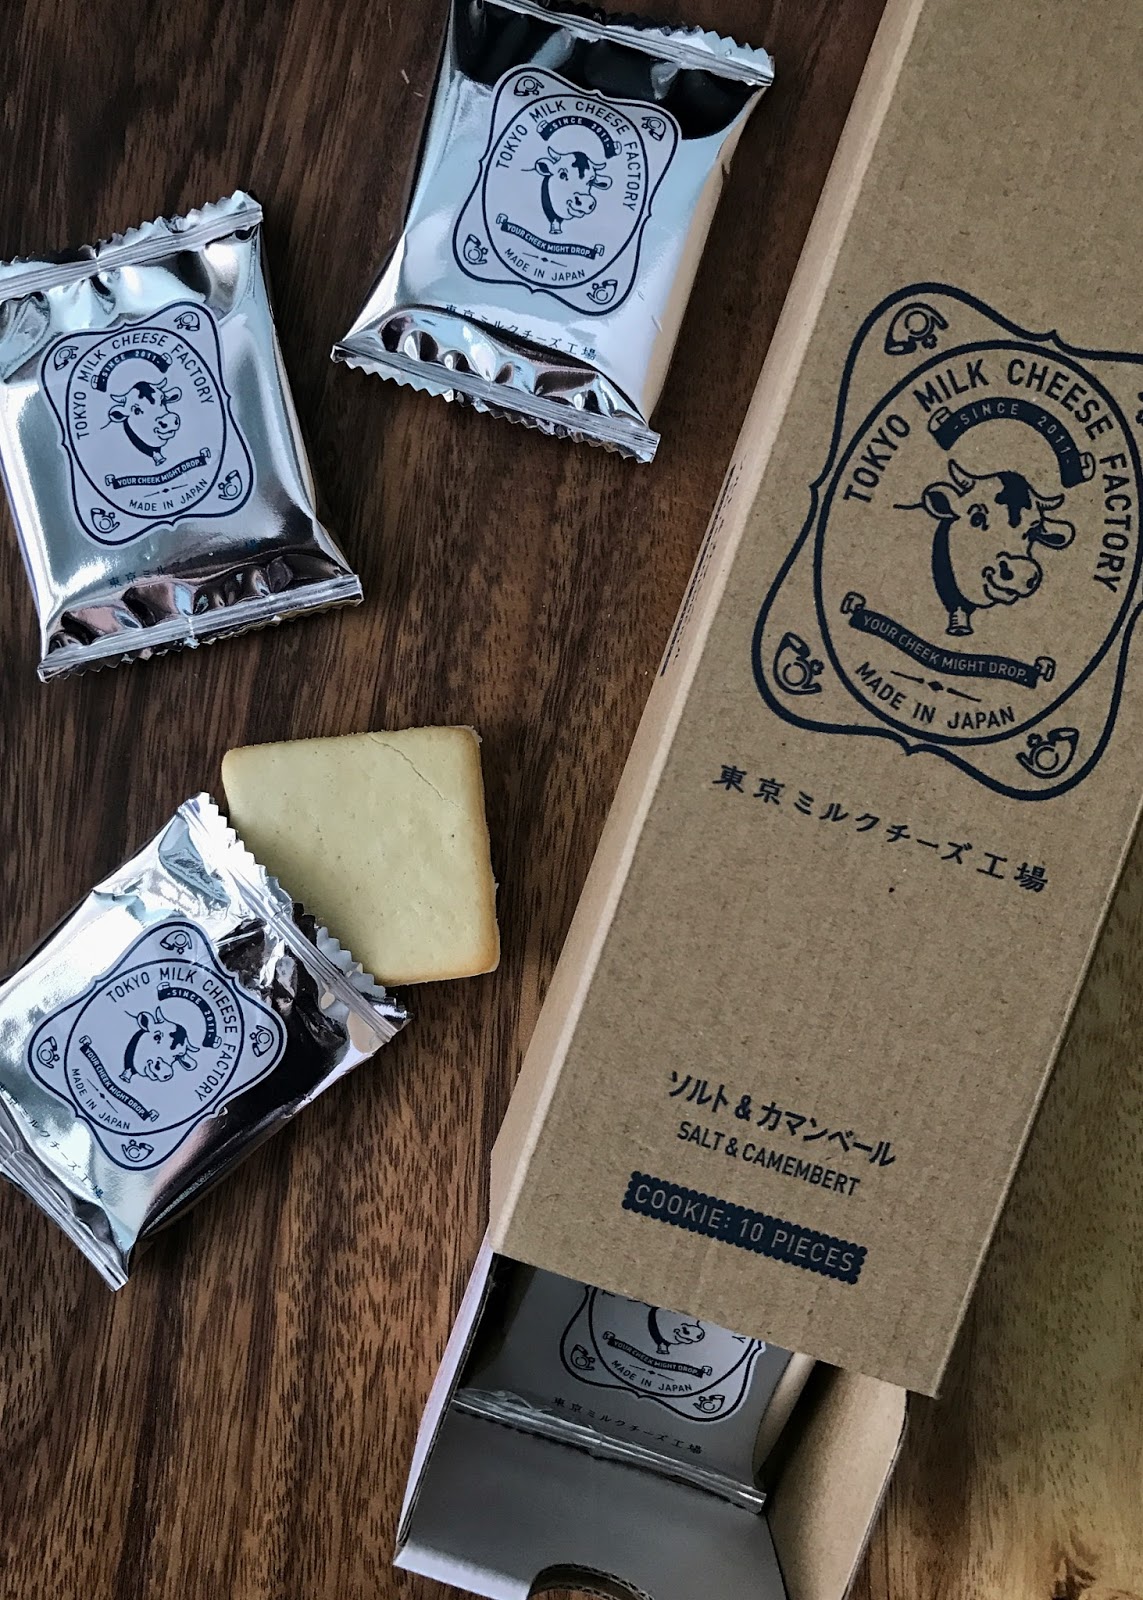 What Mary Loves: A Cheesy Affair: Tokyo Milk Cheese Factory